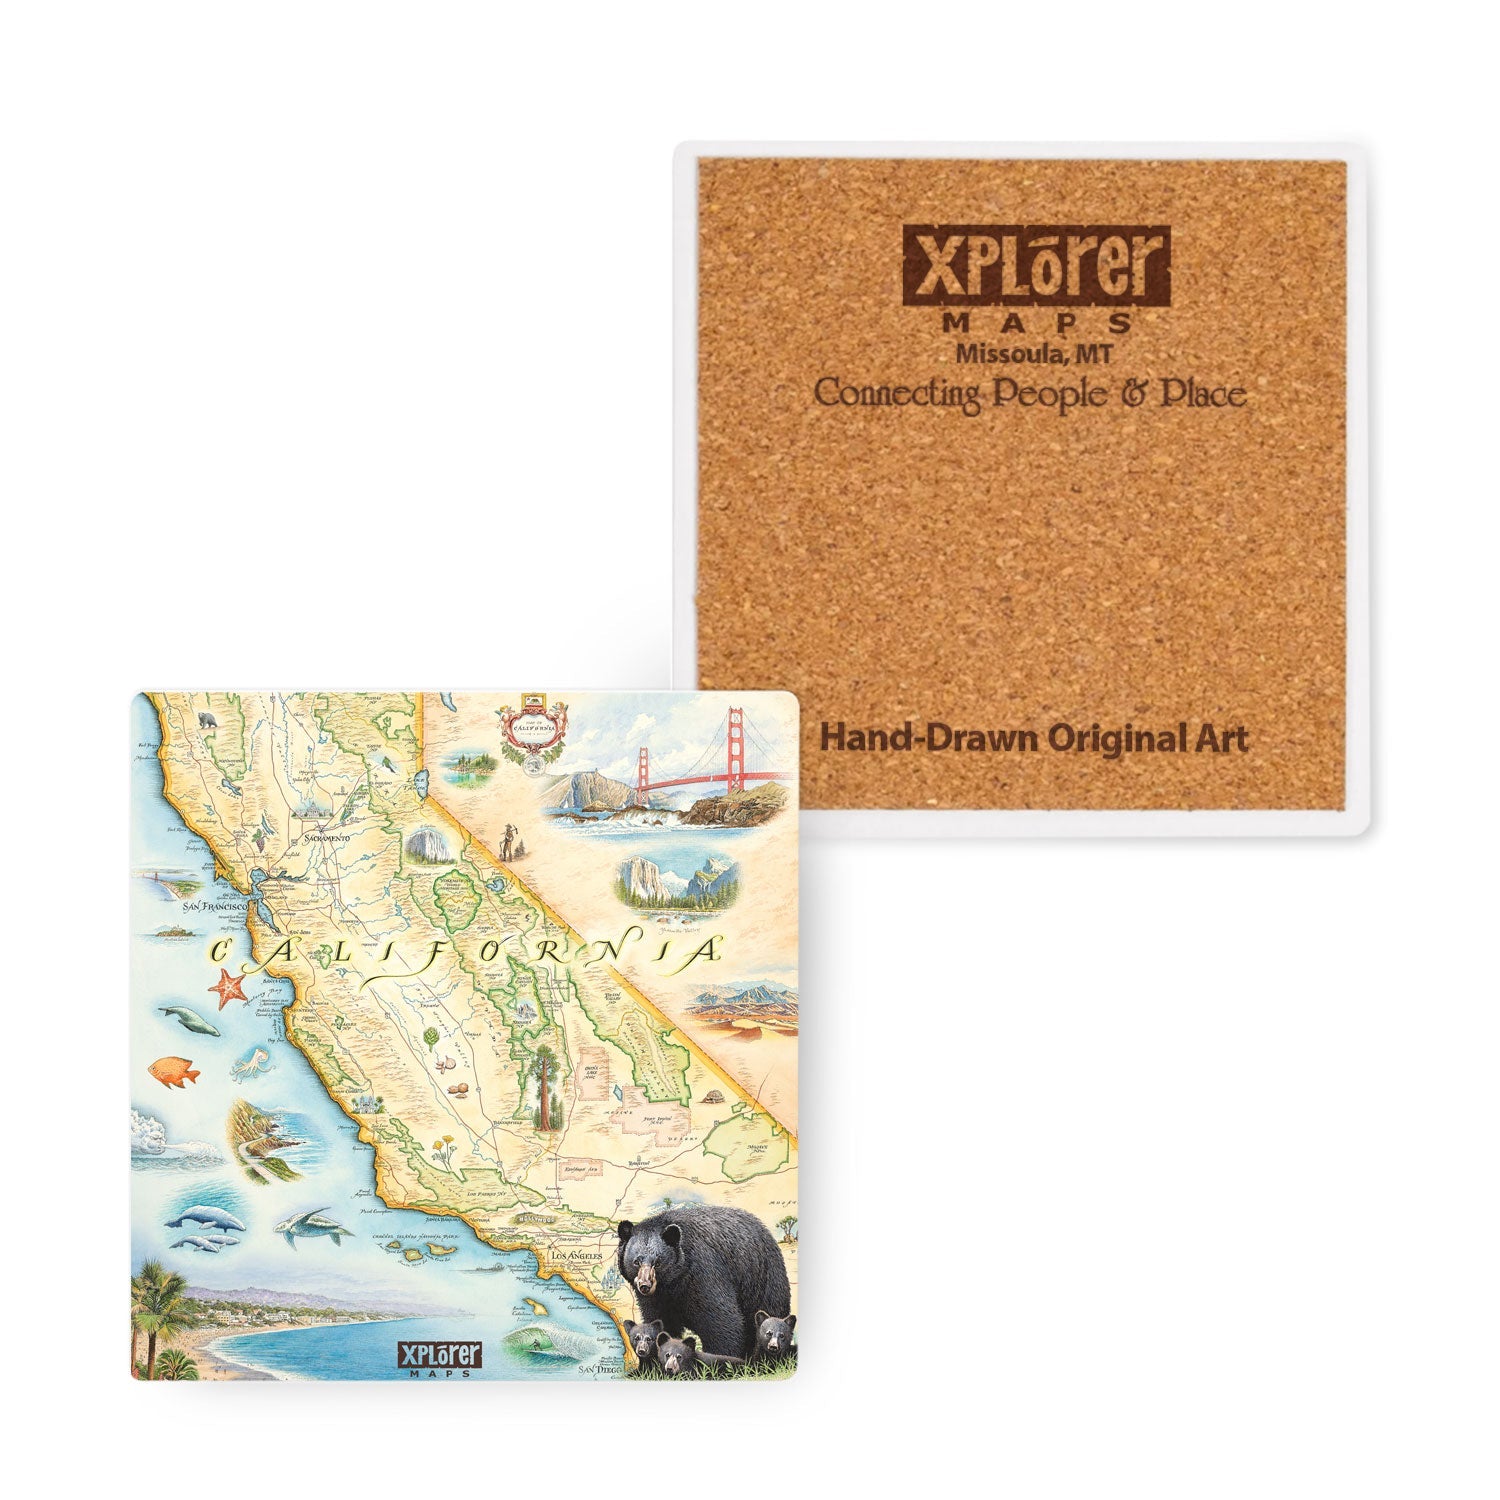 California State Map Ceramic Coaster by Xplorer Maps. Featuring birds whales, seals, otters, and butterflies. Cultural history is rich in the area with the fame of Hearst Castle, Ranchers of Montana De Oro, Dunites of Oceano Dunes, and Native people that have lived on this land for thousands of years from San Francisco to Los Angeles. Some cities you will find are Arroyo Grande, San Luis Obispo, Morro Bay, and Paso Robles.